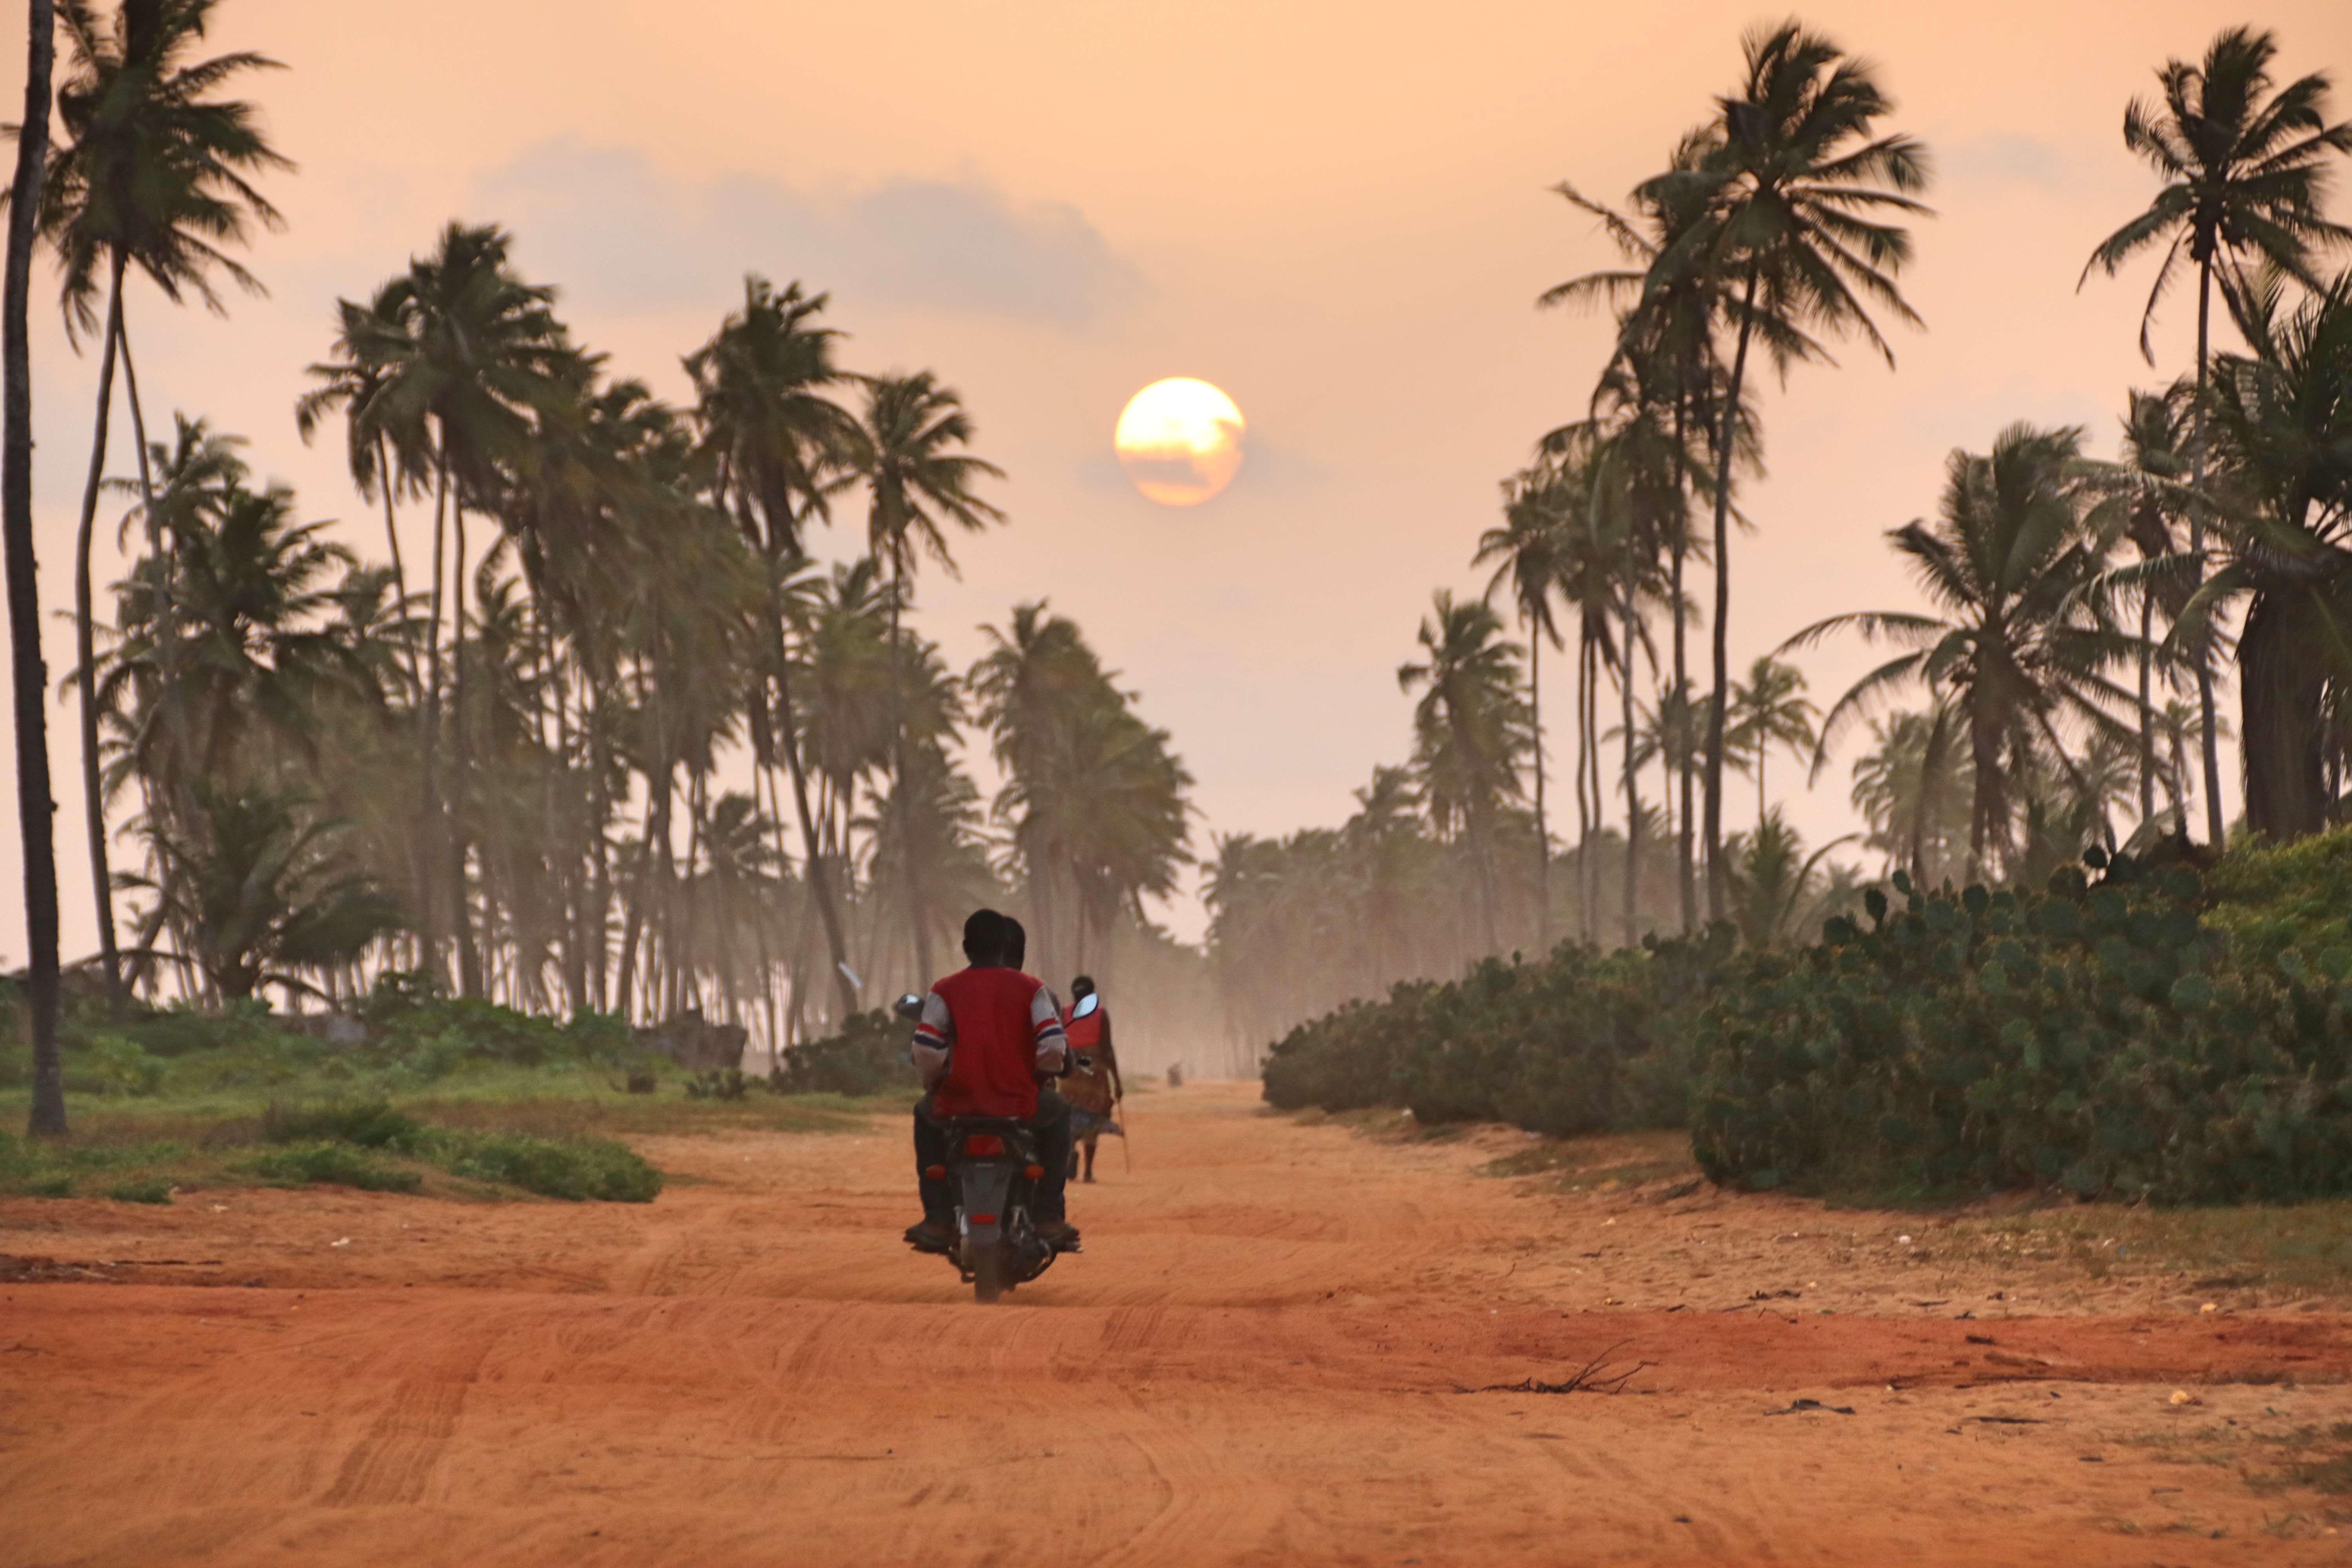 Sunset in benin. Asket permission before use. Under creative commons license. CC: Jasmine Nears Biesinger, Africa,